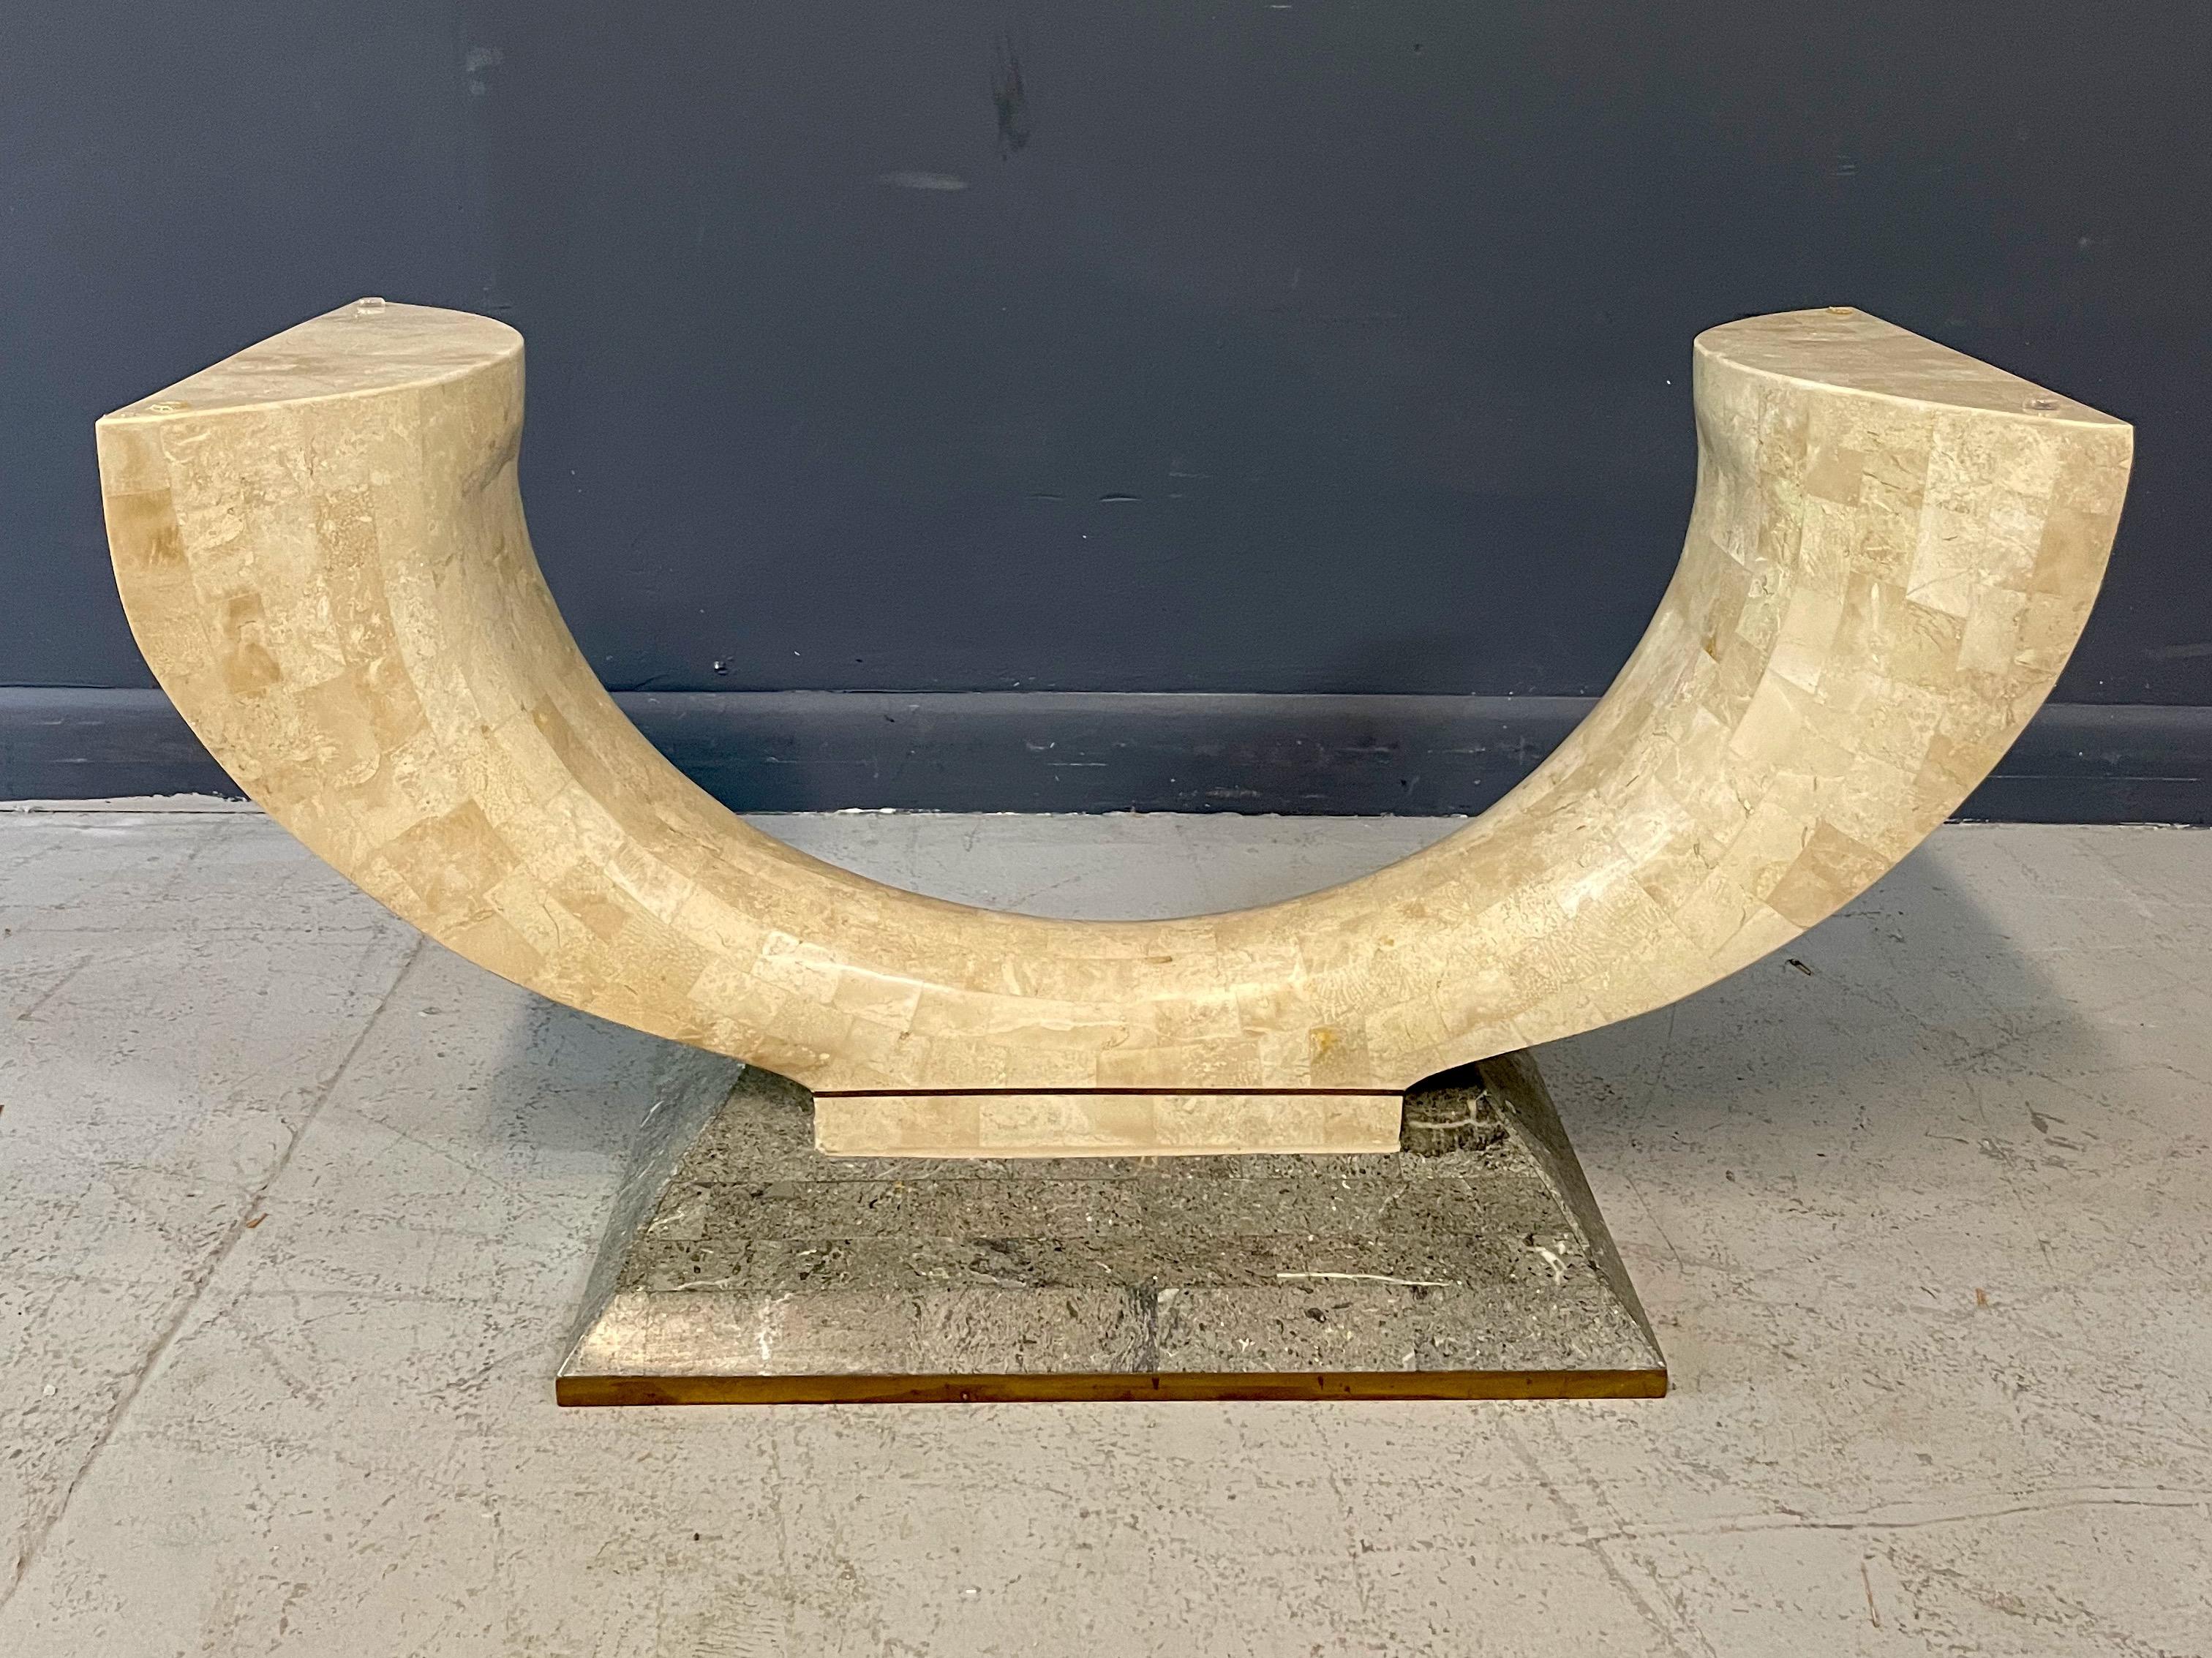 This wonderful coffee table is striking in its unusual shape and will make a statement in your home! Tessellated fossil stone and brass detailing make this a very special table.